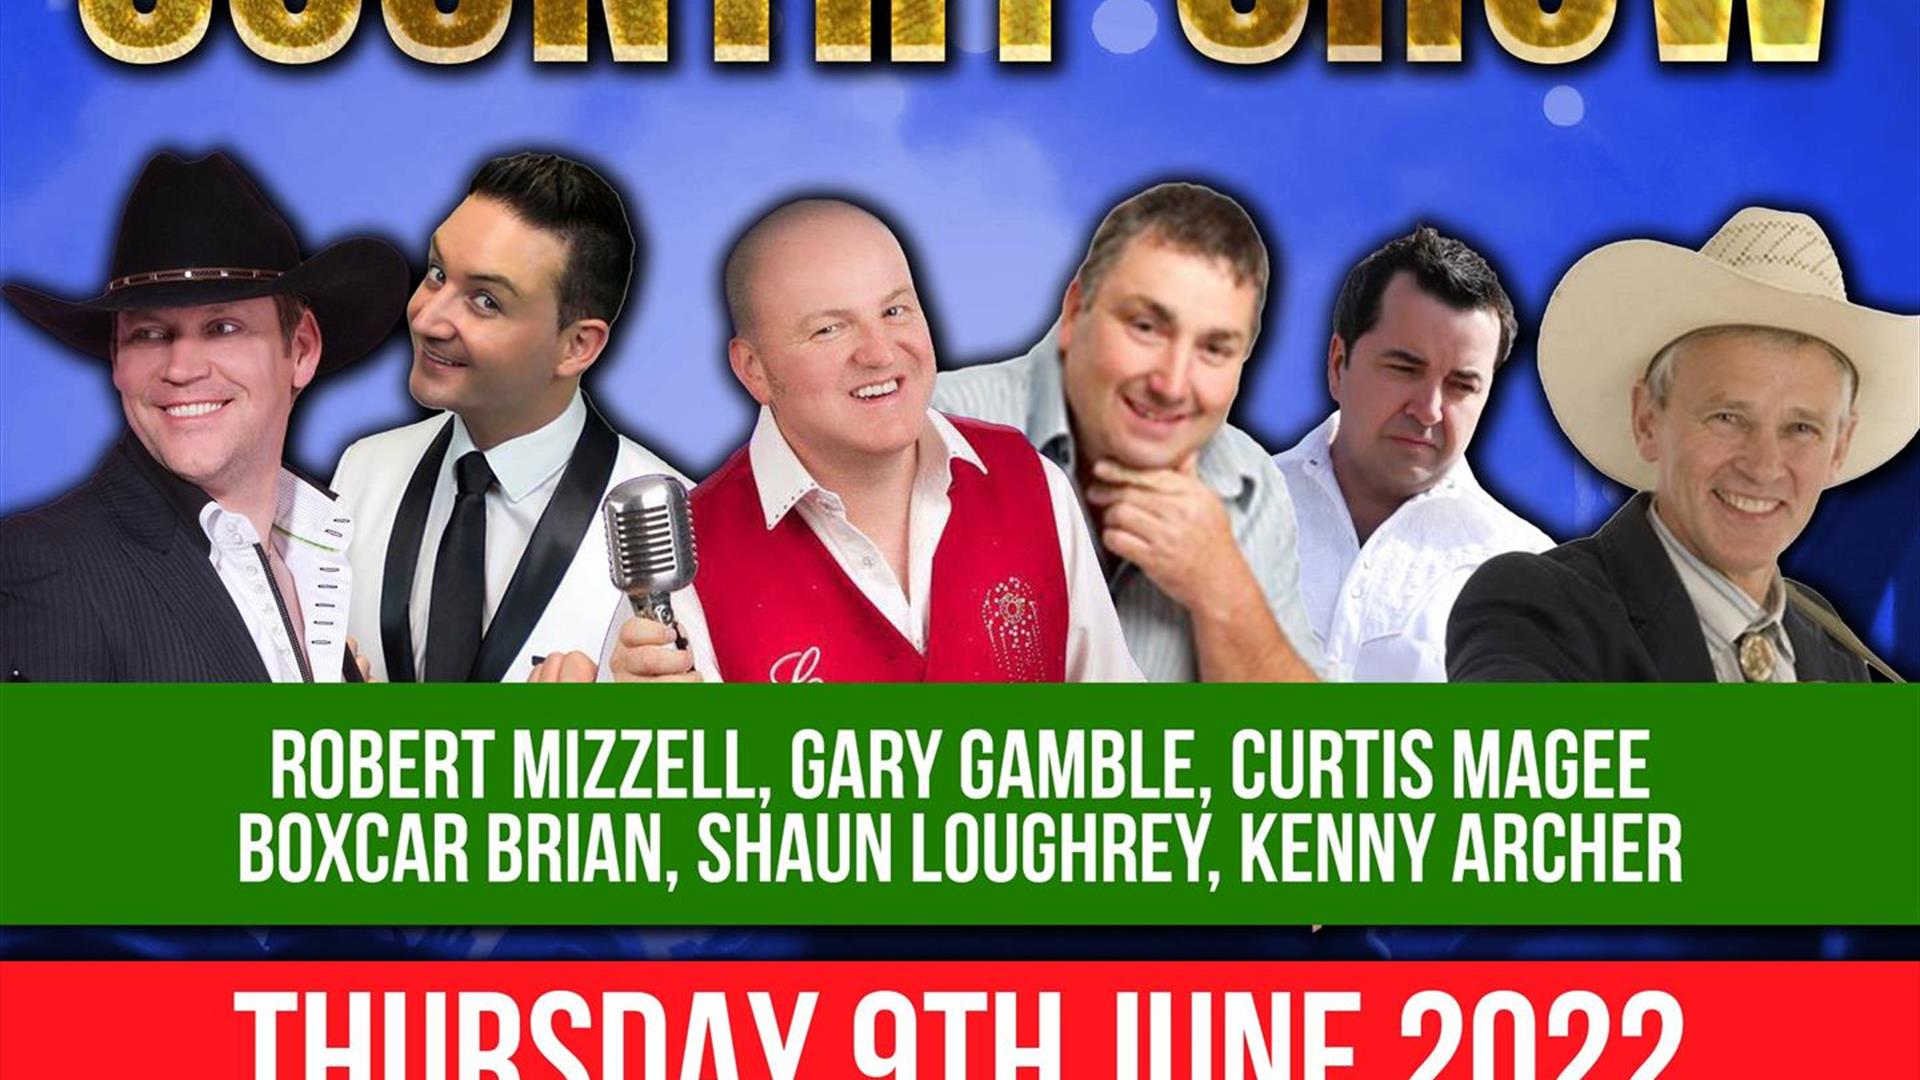 Image is a poster advertising The Summer Country Show